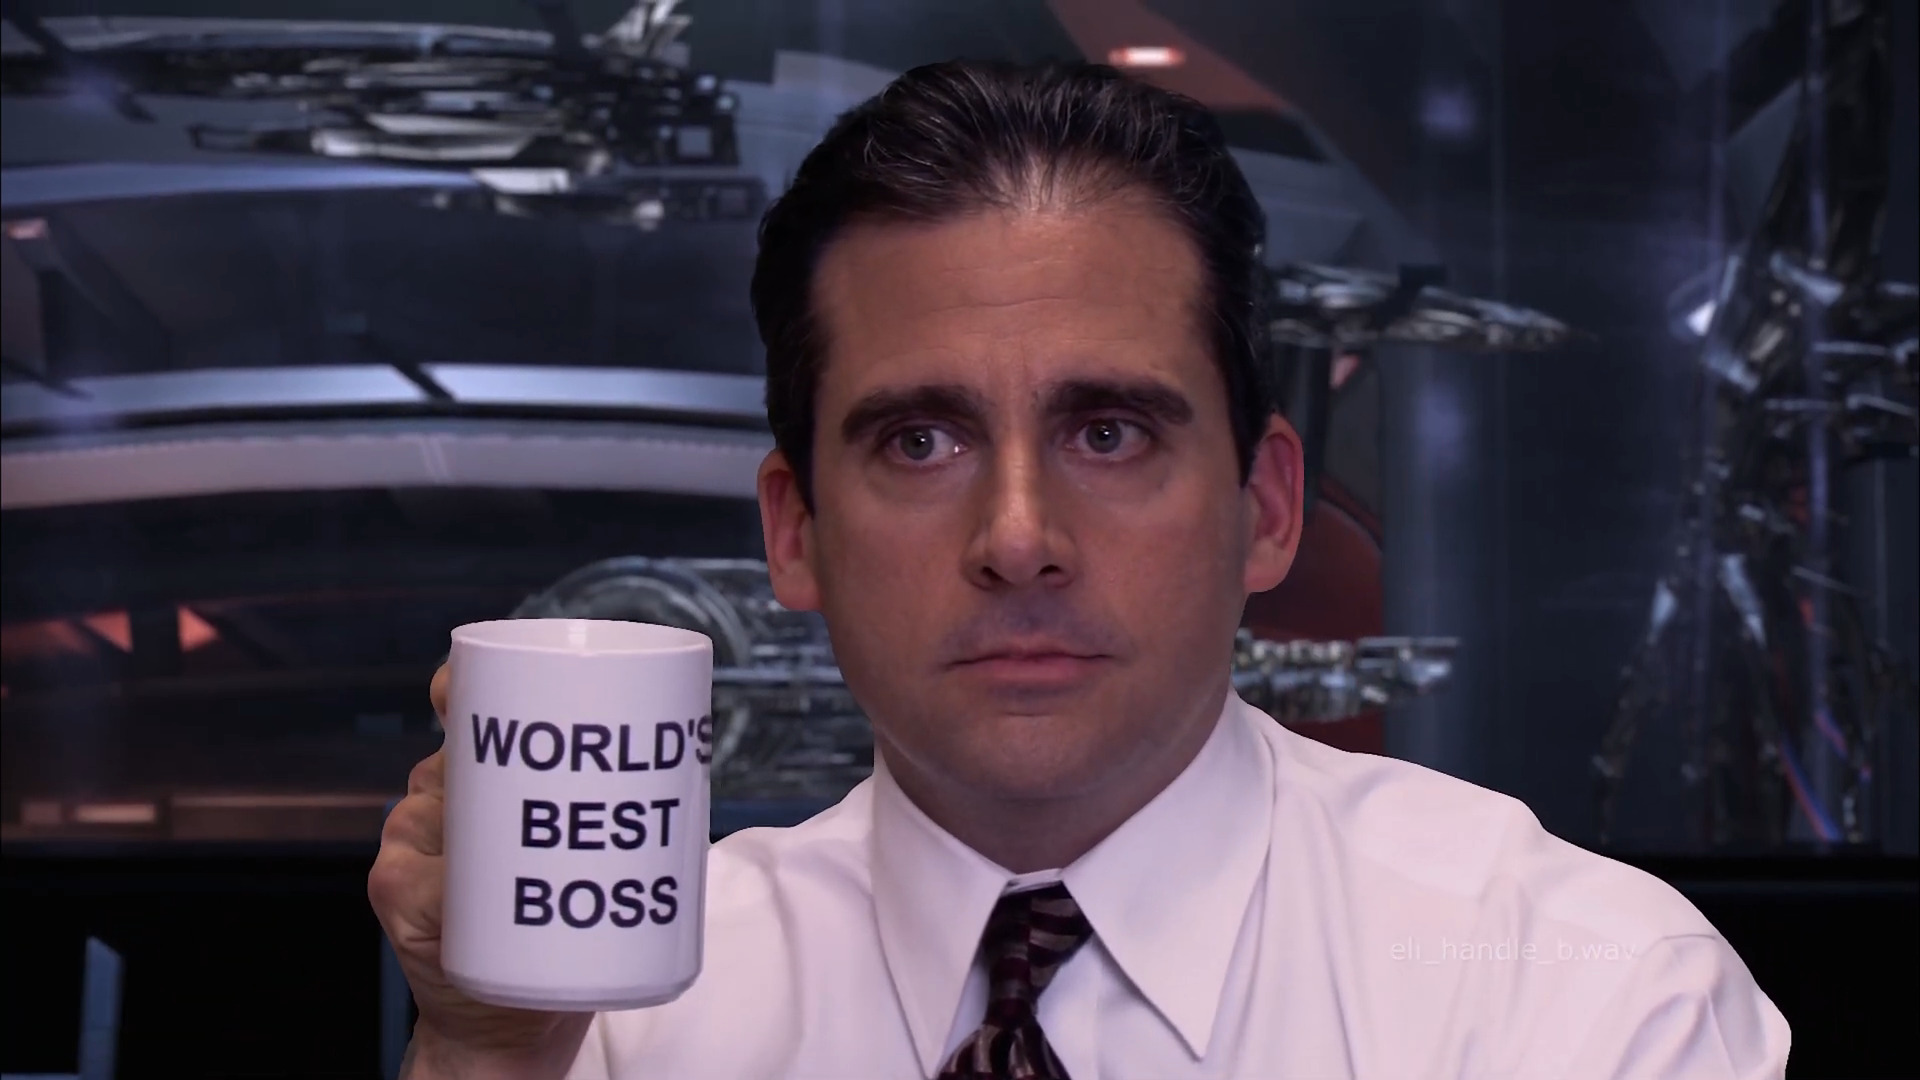  This Mass Effect/The Office mashup convinced me Michael Scott is the canonical Commander Shepard 